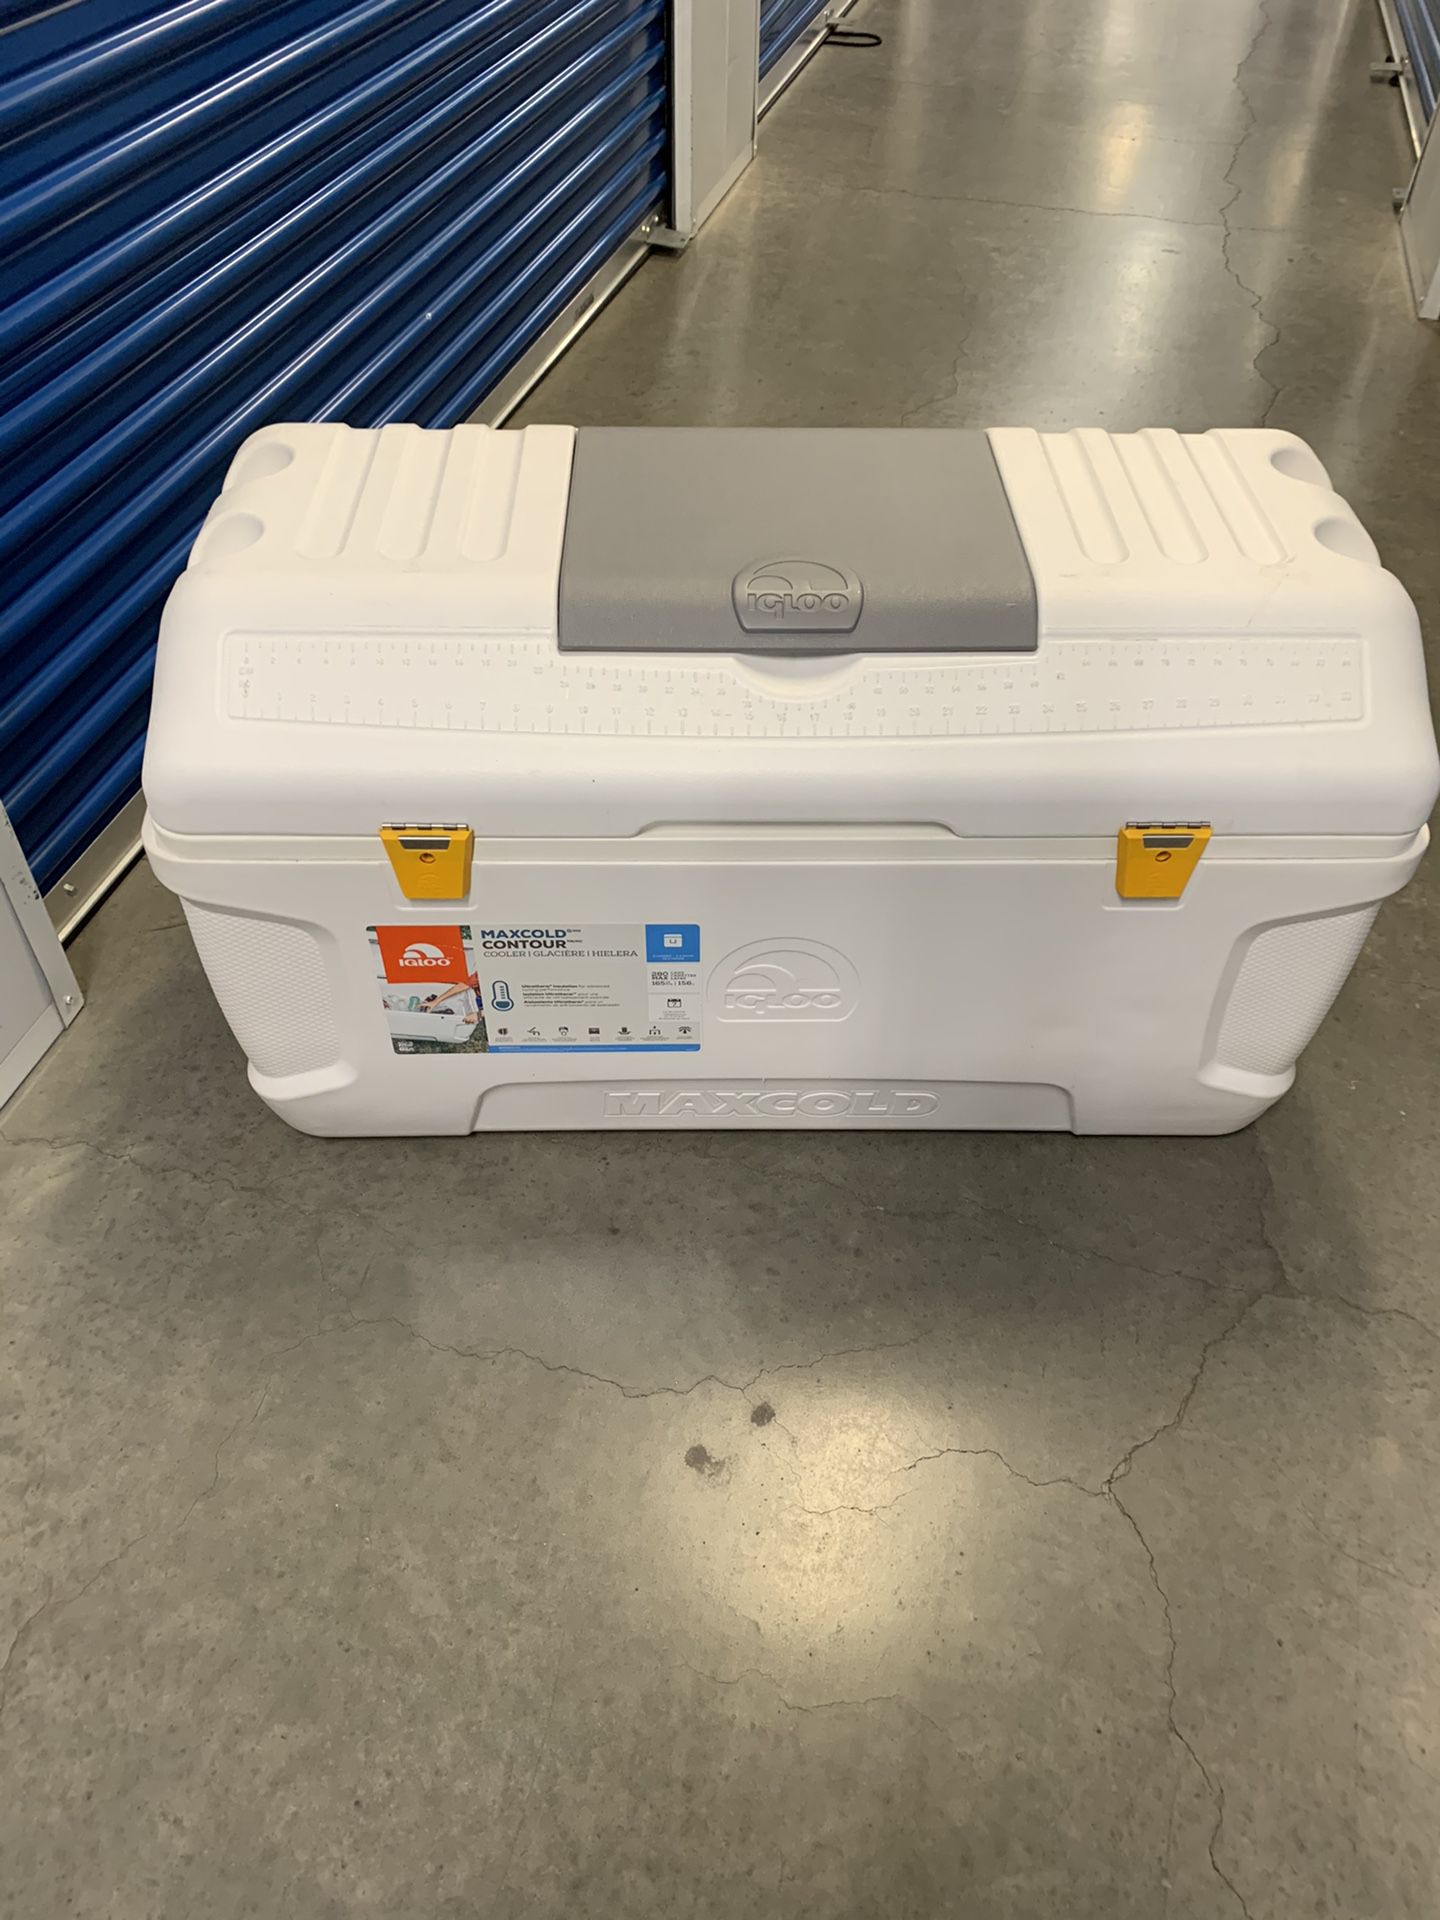 Igloo cooler up to 280 cans like new